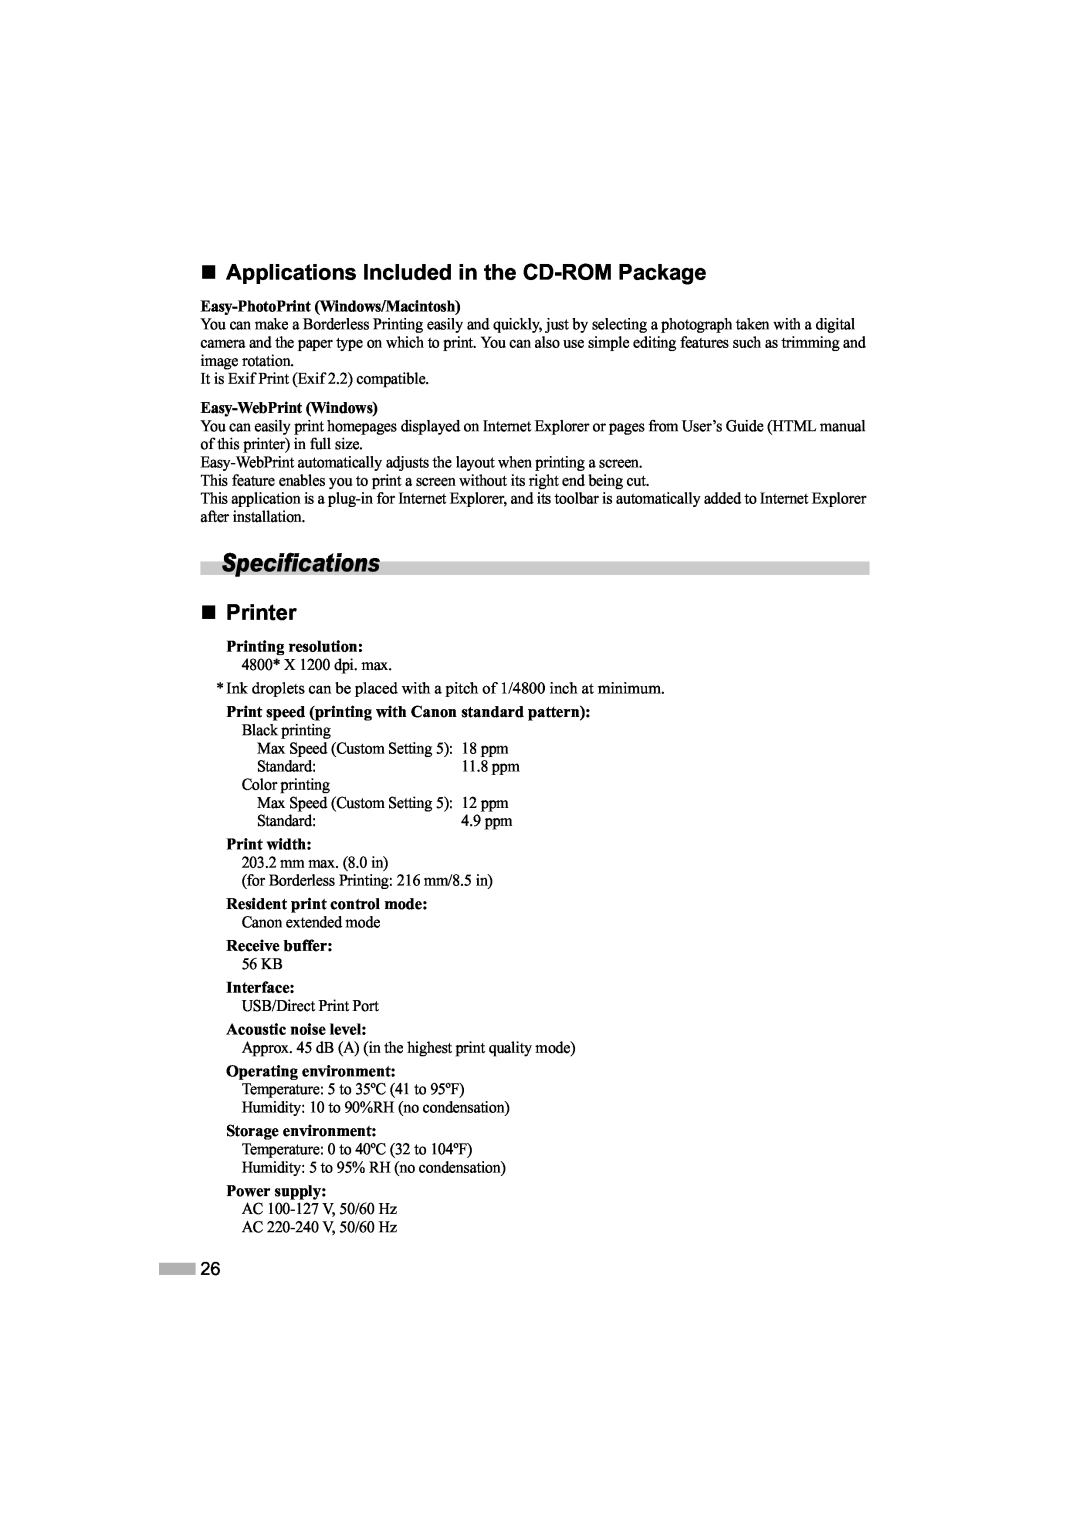 Canon 475D quick start Specifications, „ Applications Included in the CD-ROM Package, „ Printer 